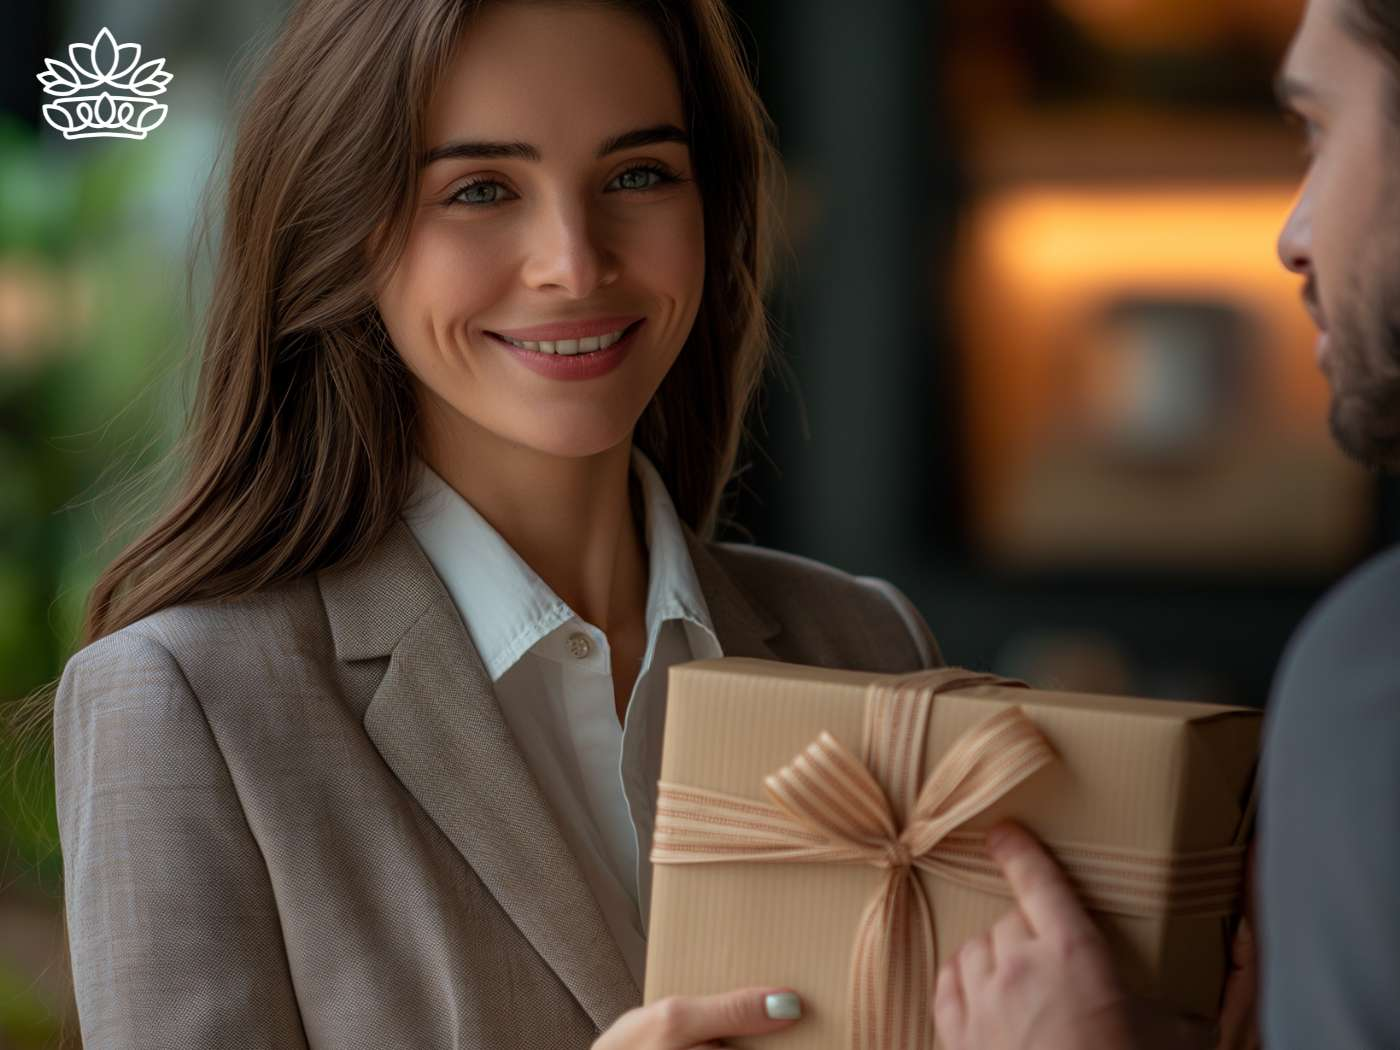 A woman with a warm smile receiving a tastefully wrapped gift box, a moment of thoughtful giving at Fabulous Flowers and Gifts and corporate gifting.